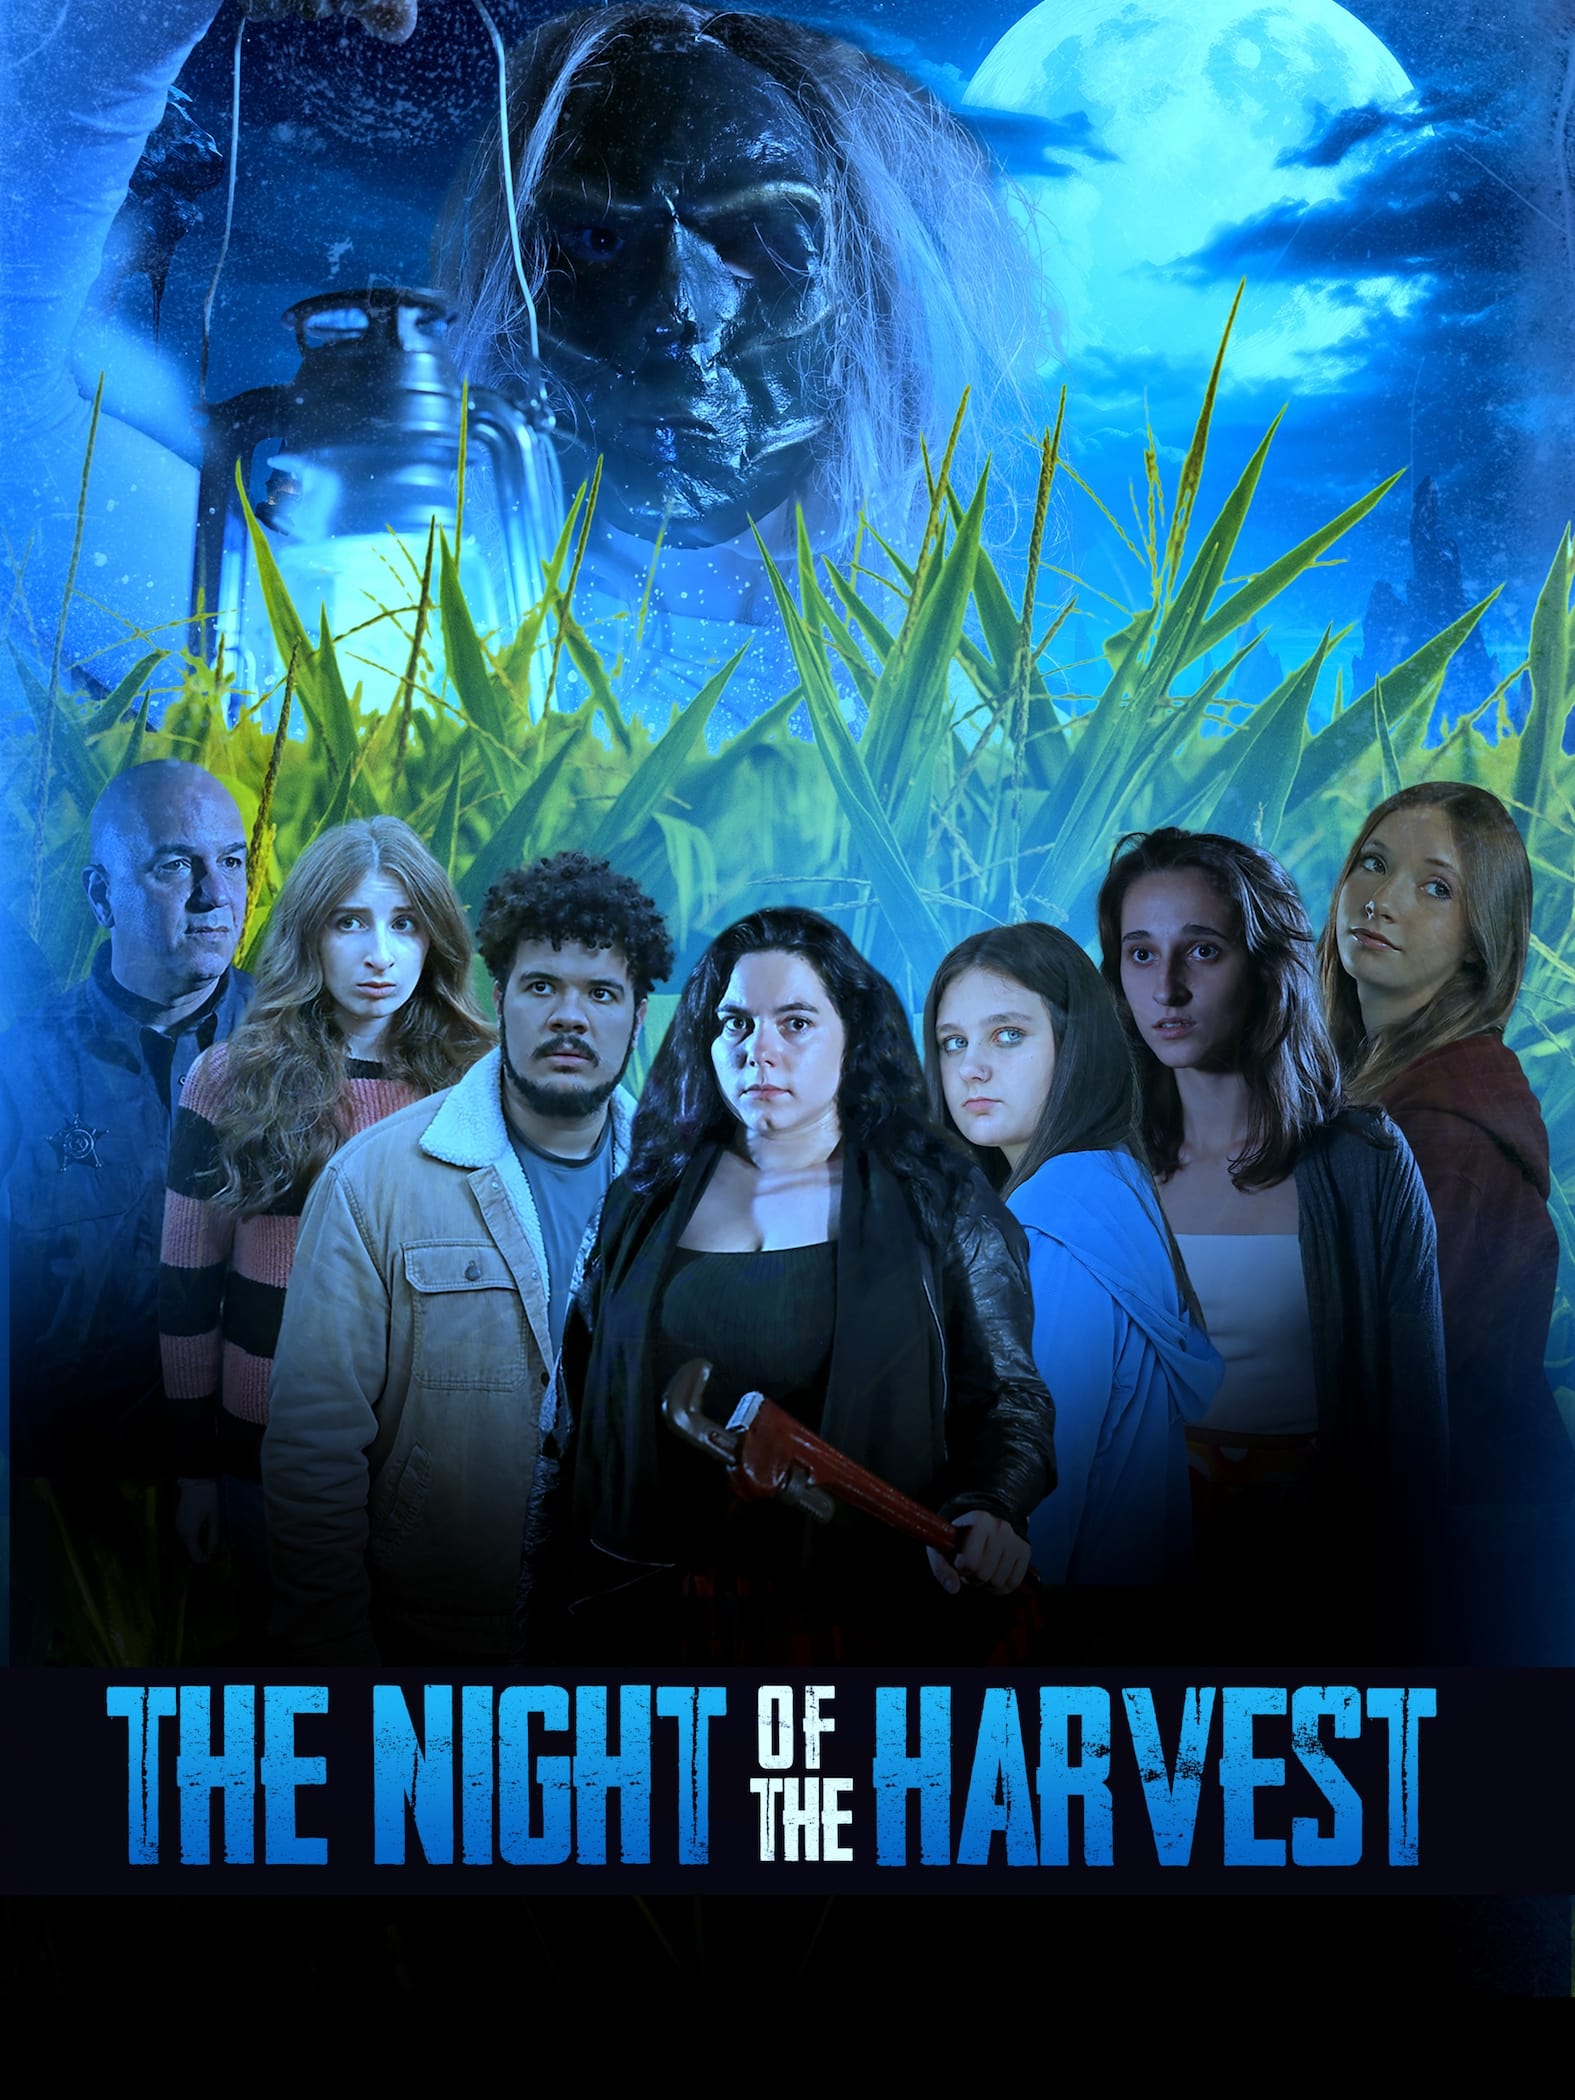 The Night of the Harvest